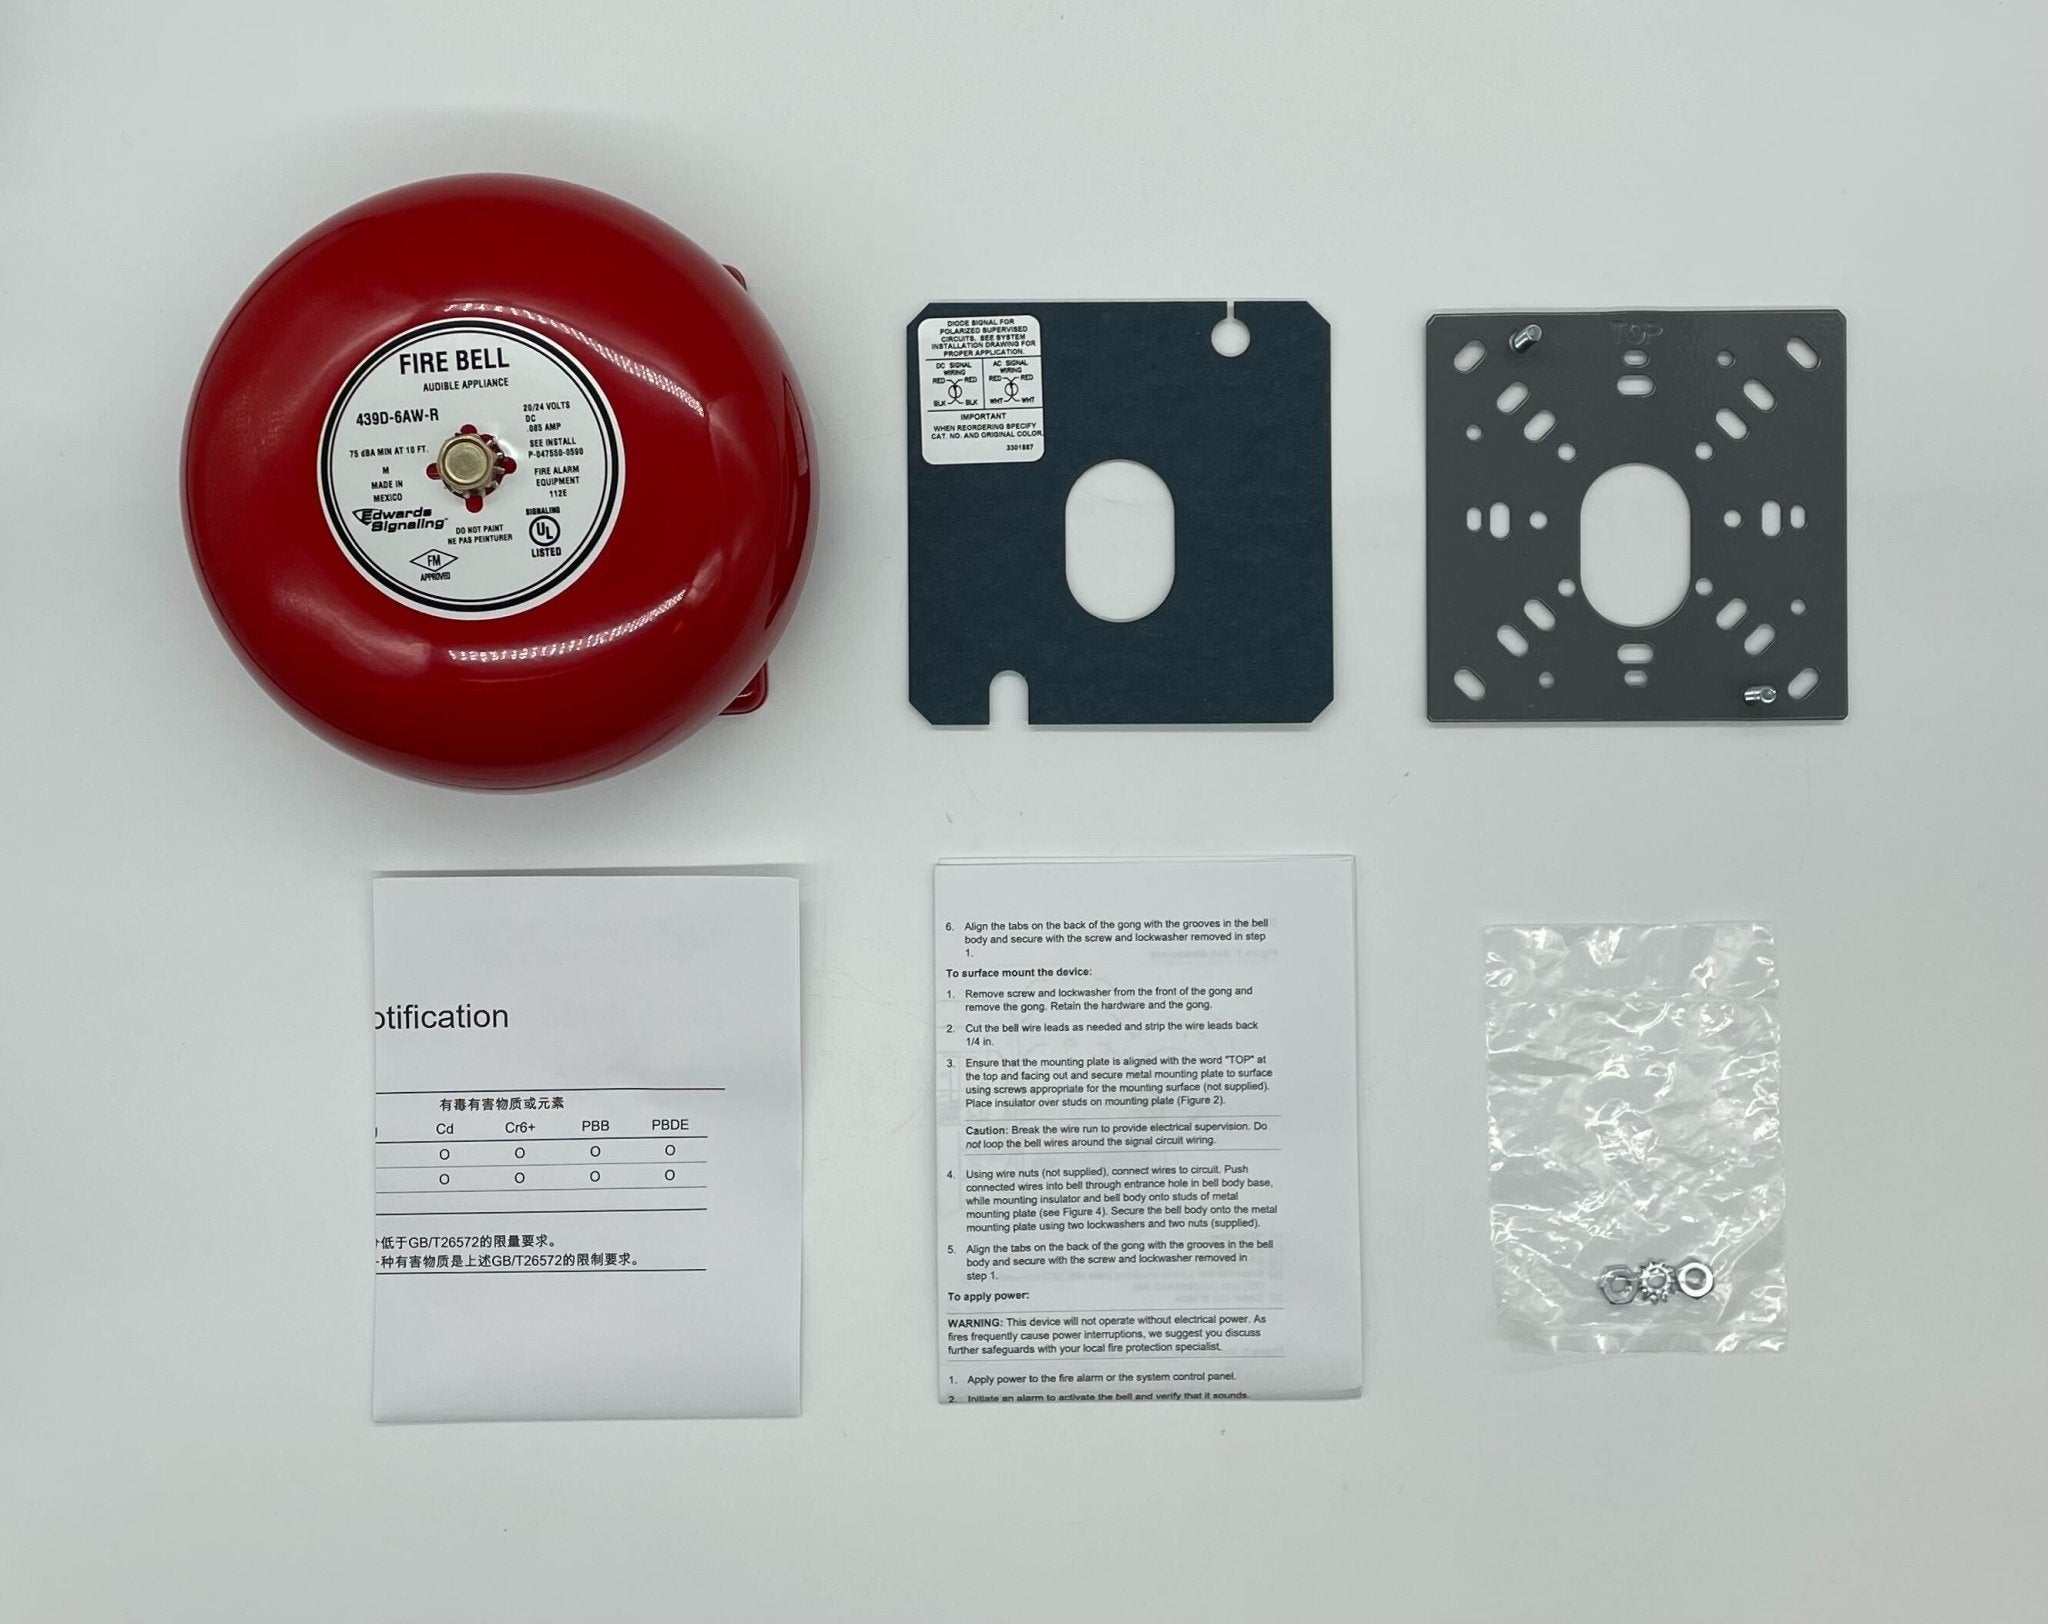 Edwards 439D-6AW-R - The Fire Alarm Supplier